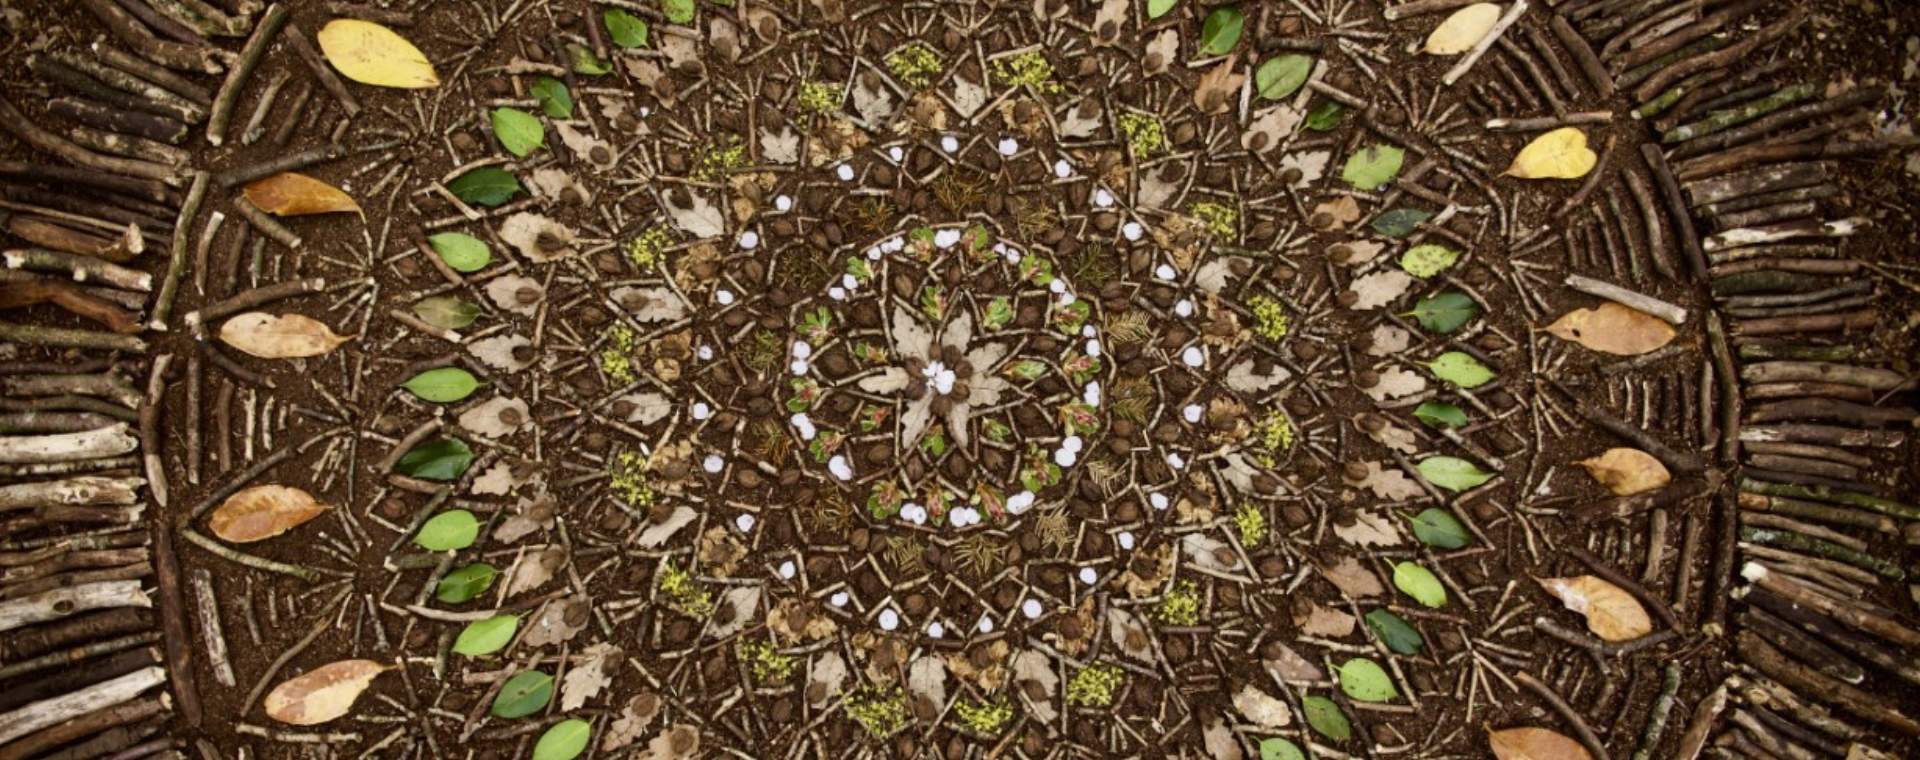 Intricate land art created using stones, leaves and sticks as part of the Land Sand Stone Festival in East Yorkshire